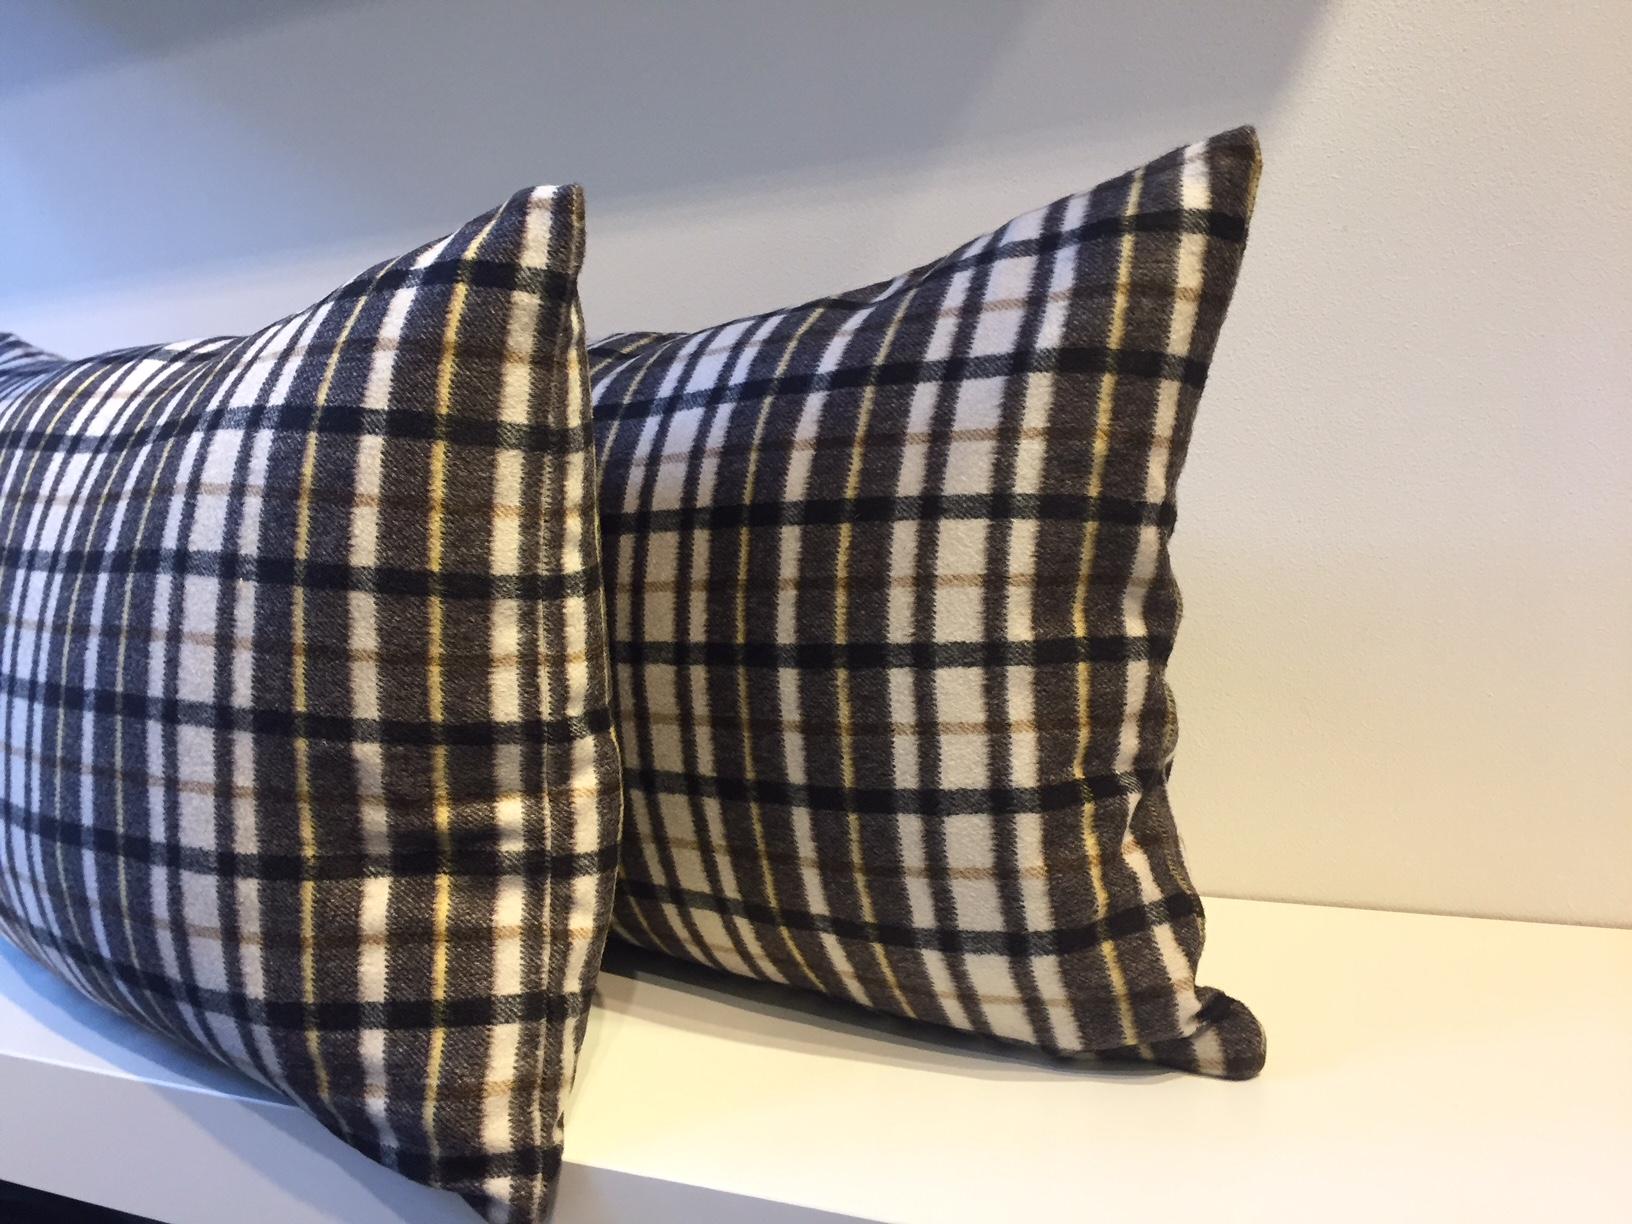 One pair (2pc) of cushions, 100% cashmere from Carlo Barbera Italy, woven check pattern in color black, dark brown on ivory base with high lights in primrose and saddle brown, cushion size: 30 x 50cm, concealed zipper in the bottom seam, inner pad